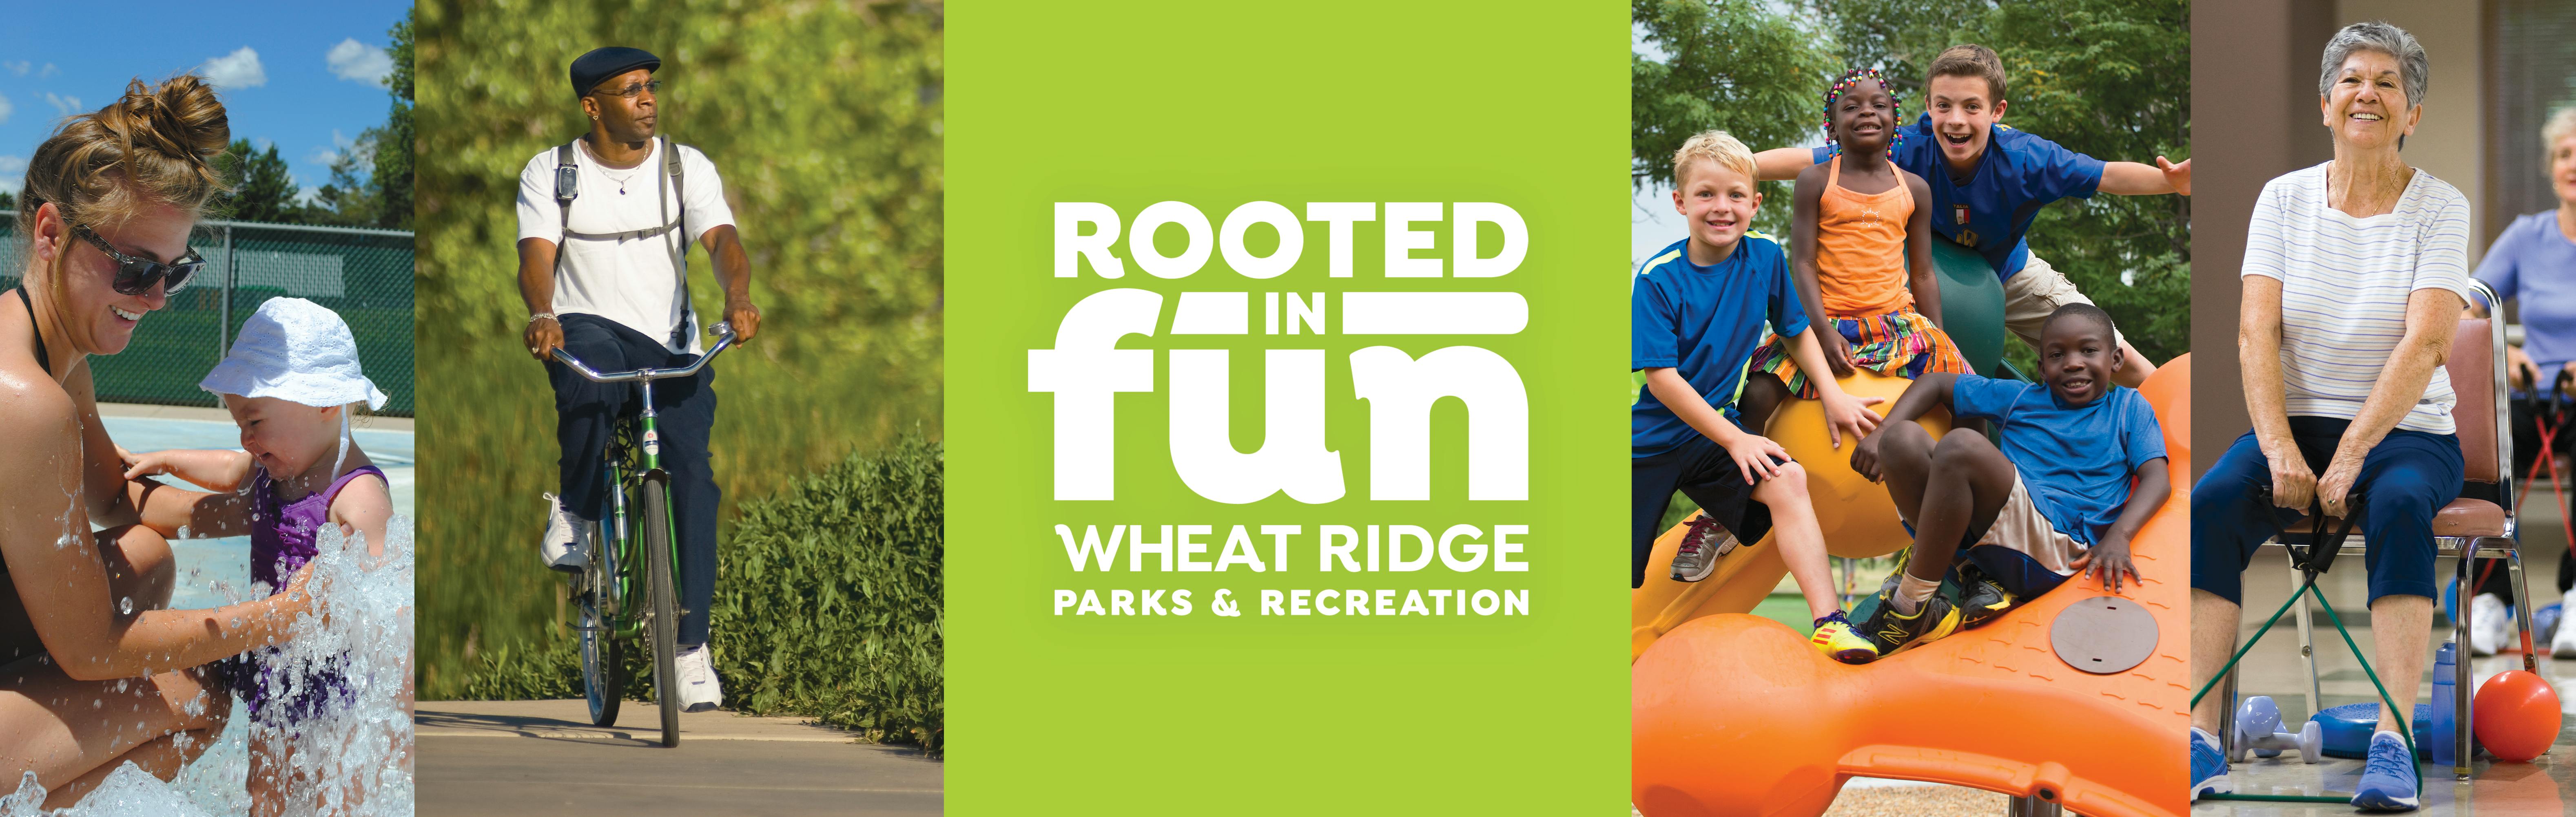 Rooted in Fun Wheat Ridge Parks & Recreation Collage 